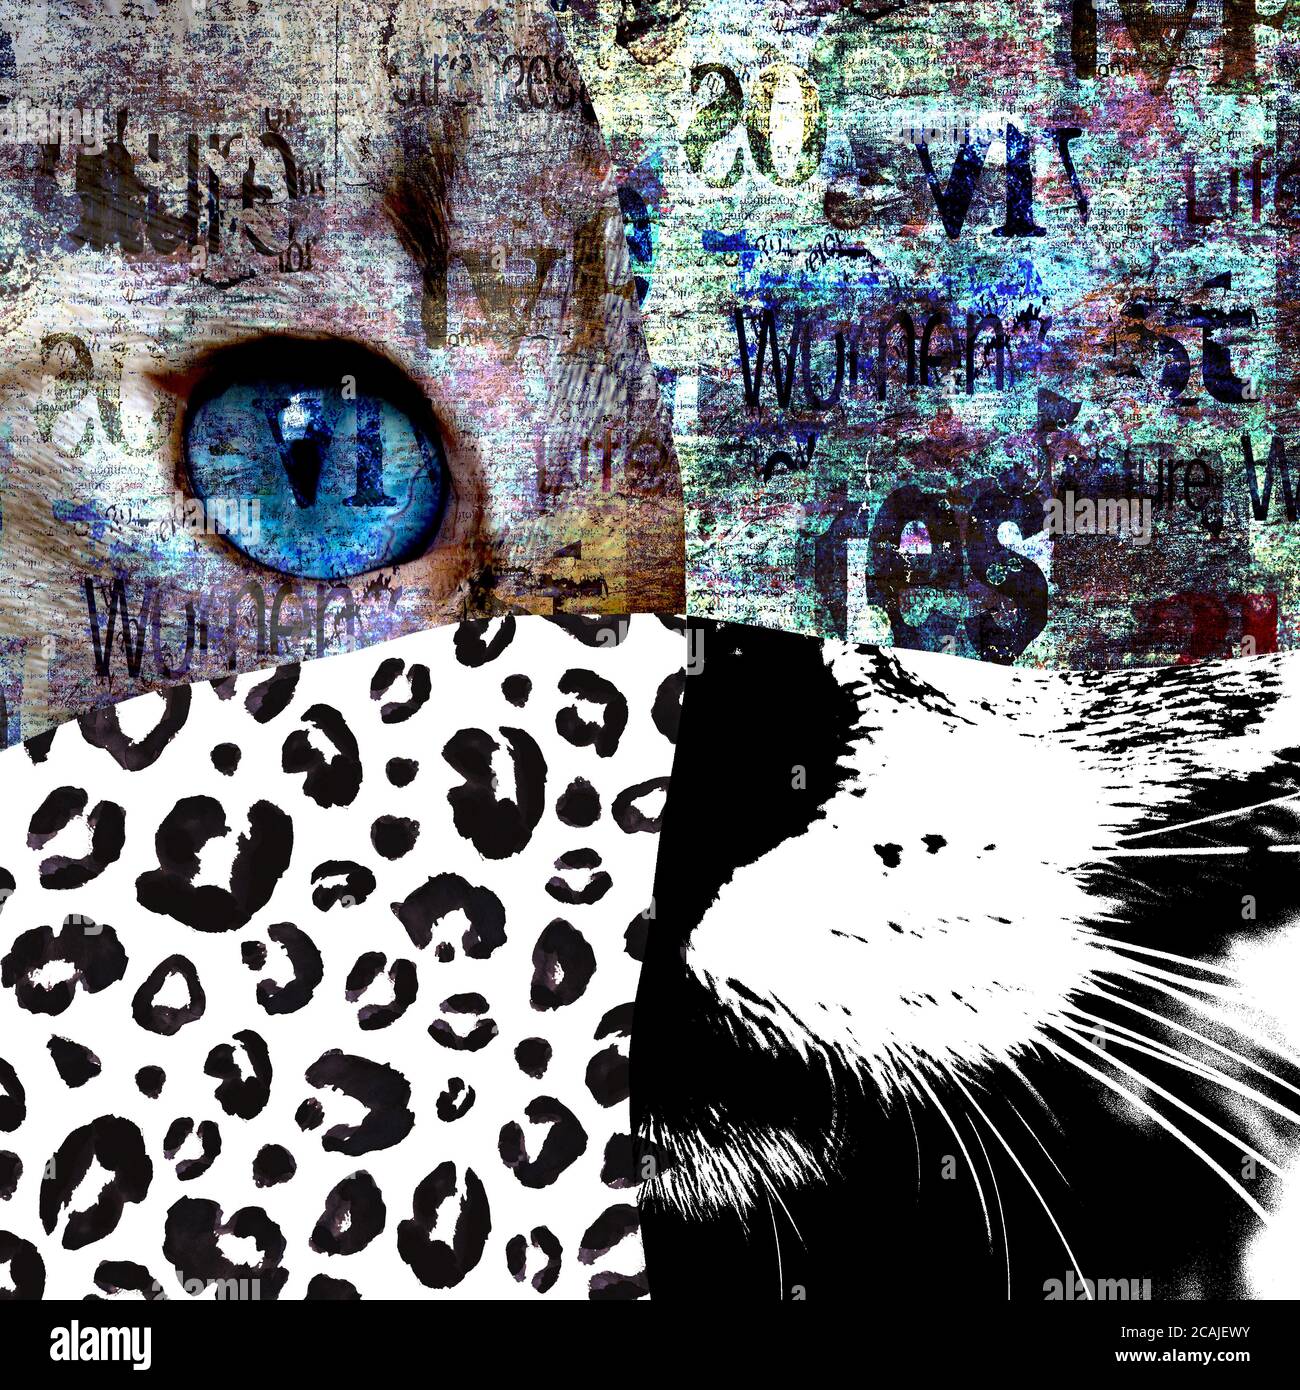 Mixed media art collage. Close up view of cat with green eyes. Cut